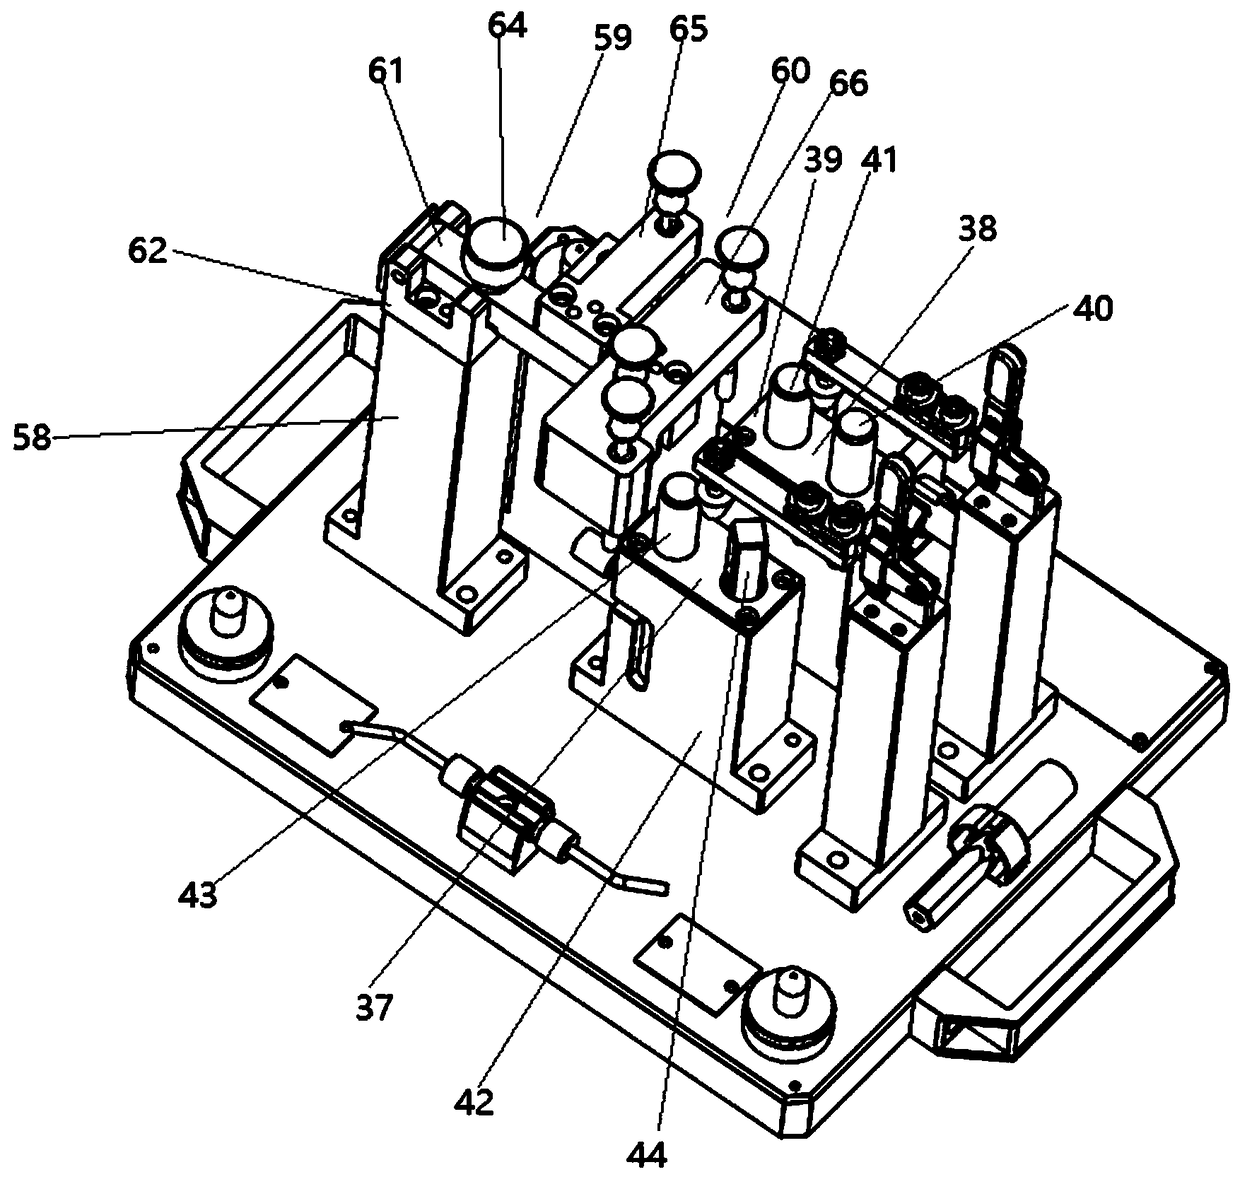 Device for detecting support arm of engine